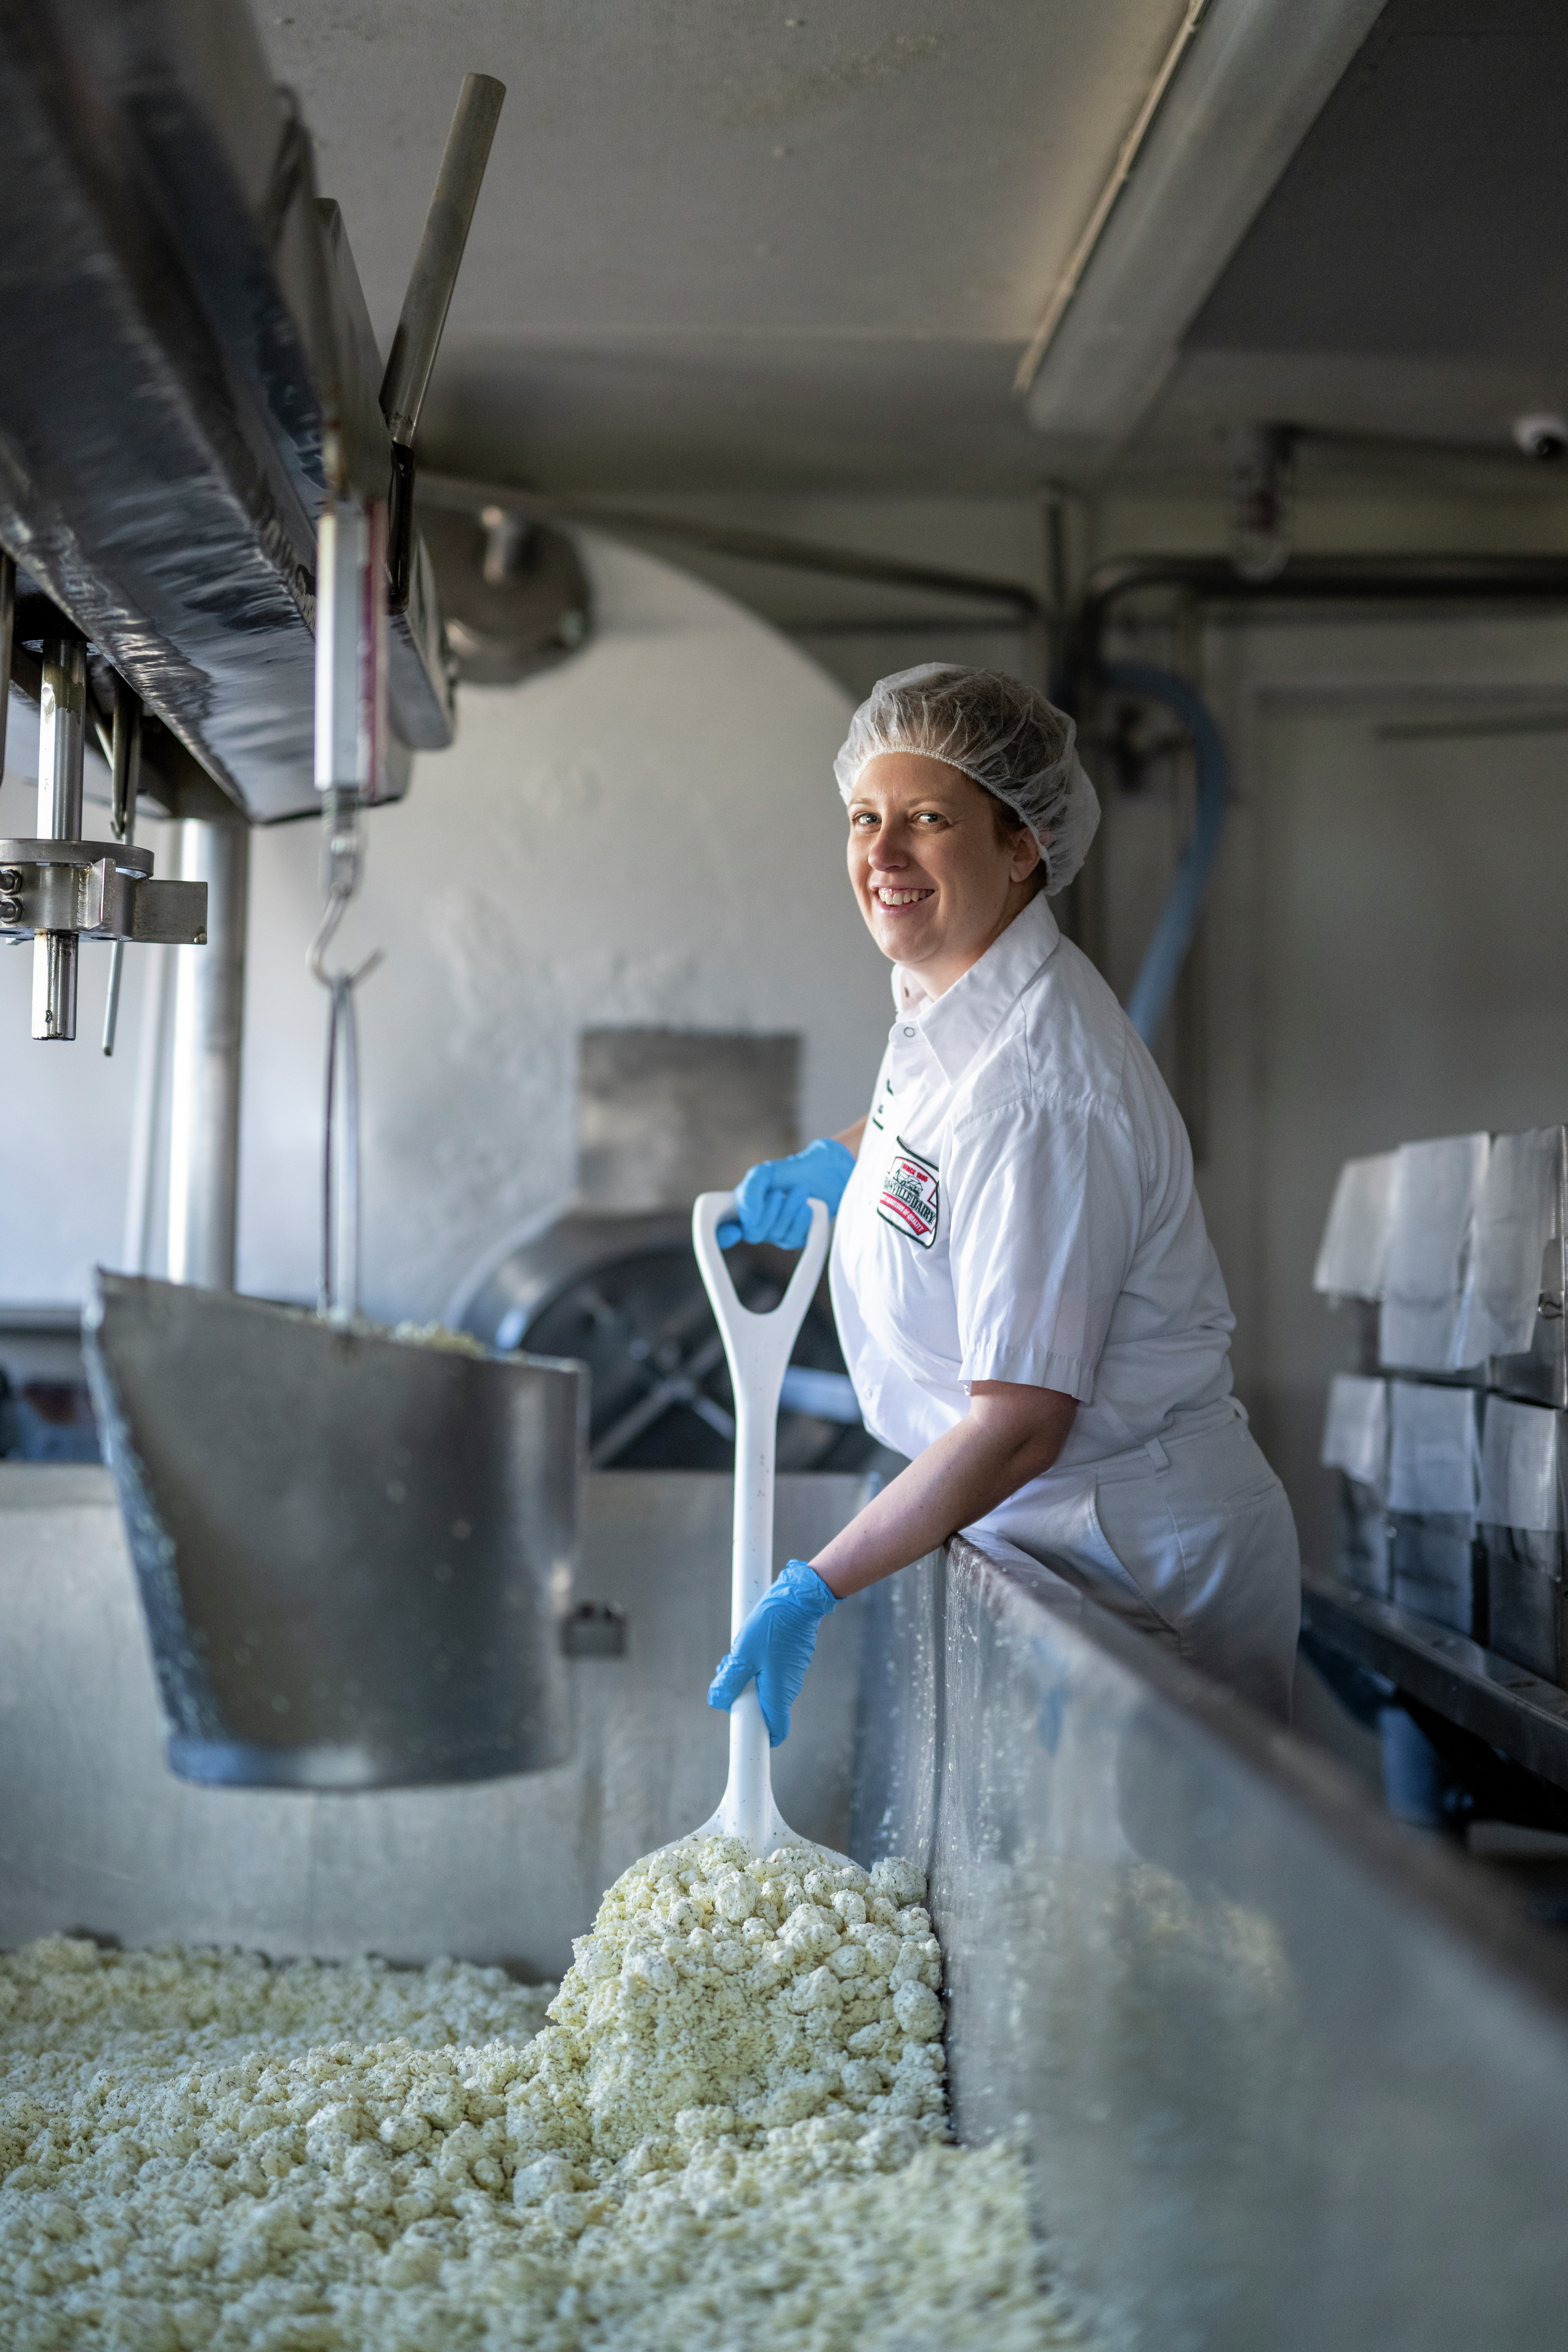 The Road To "Master Cheesemaker" -Sara Griesbach Becomes 3rd Ever Woman Graduate